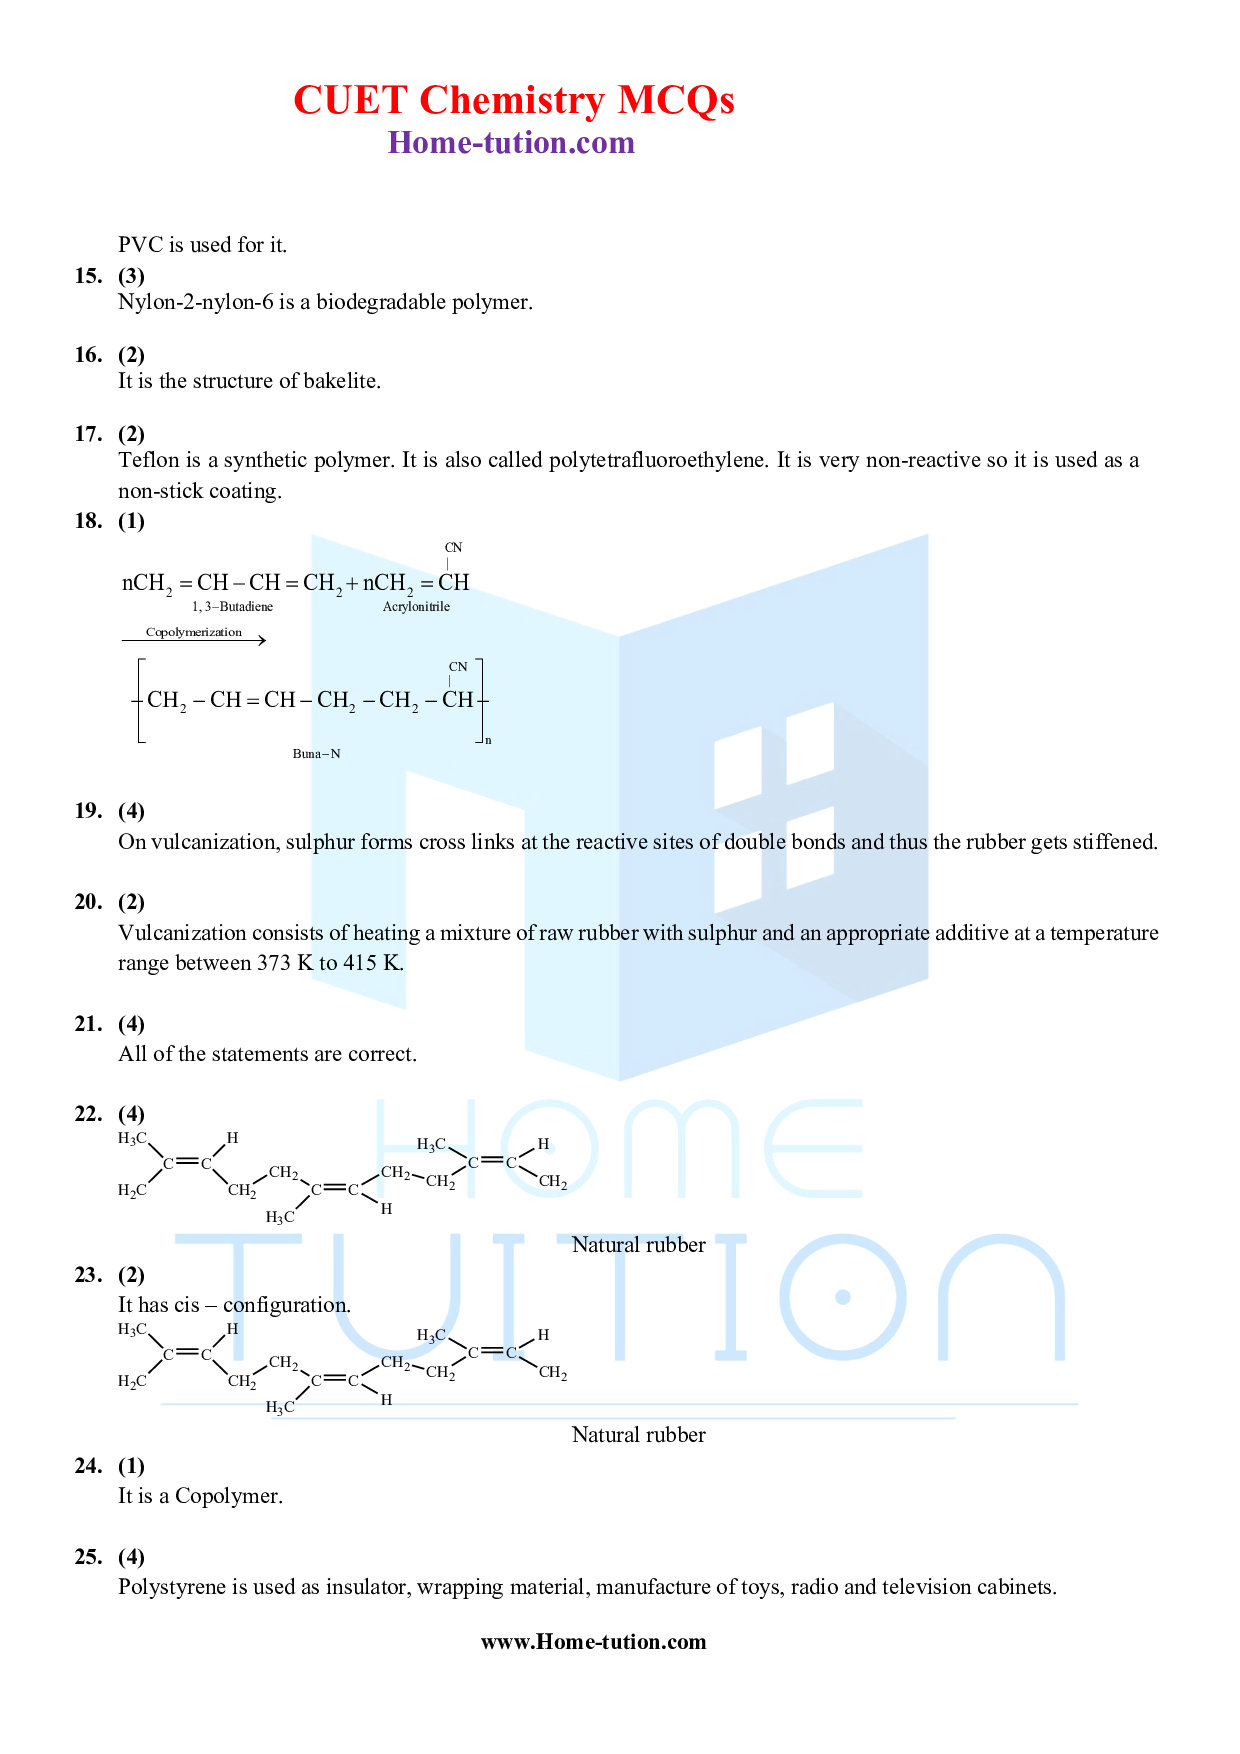 CUET MCQ Questions For Chapter 15 Polymer